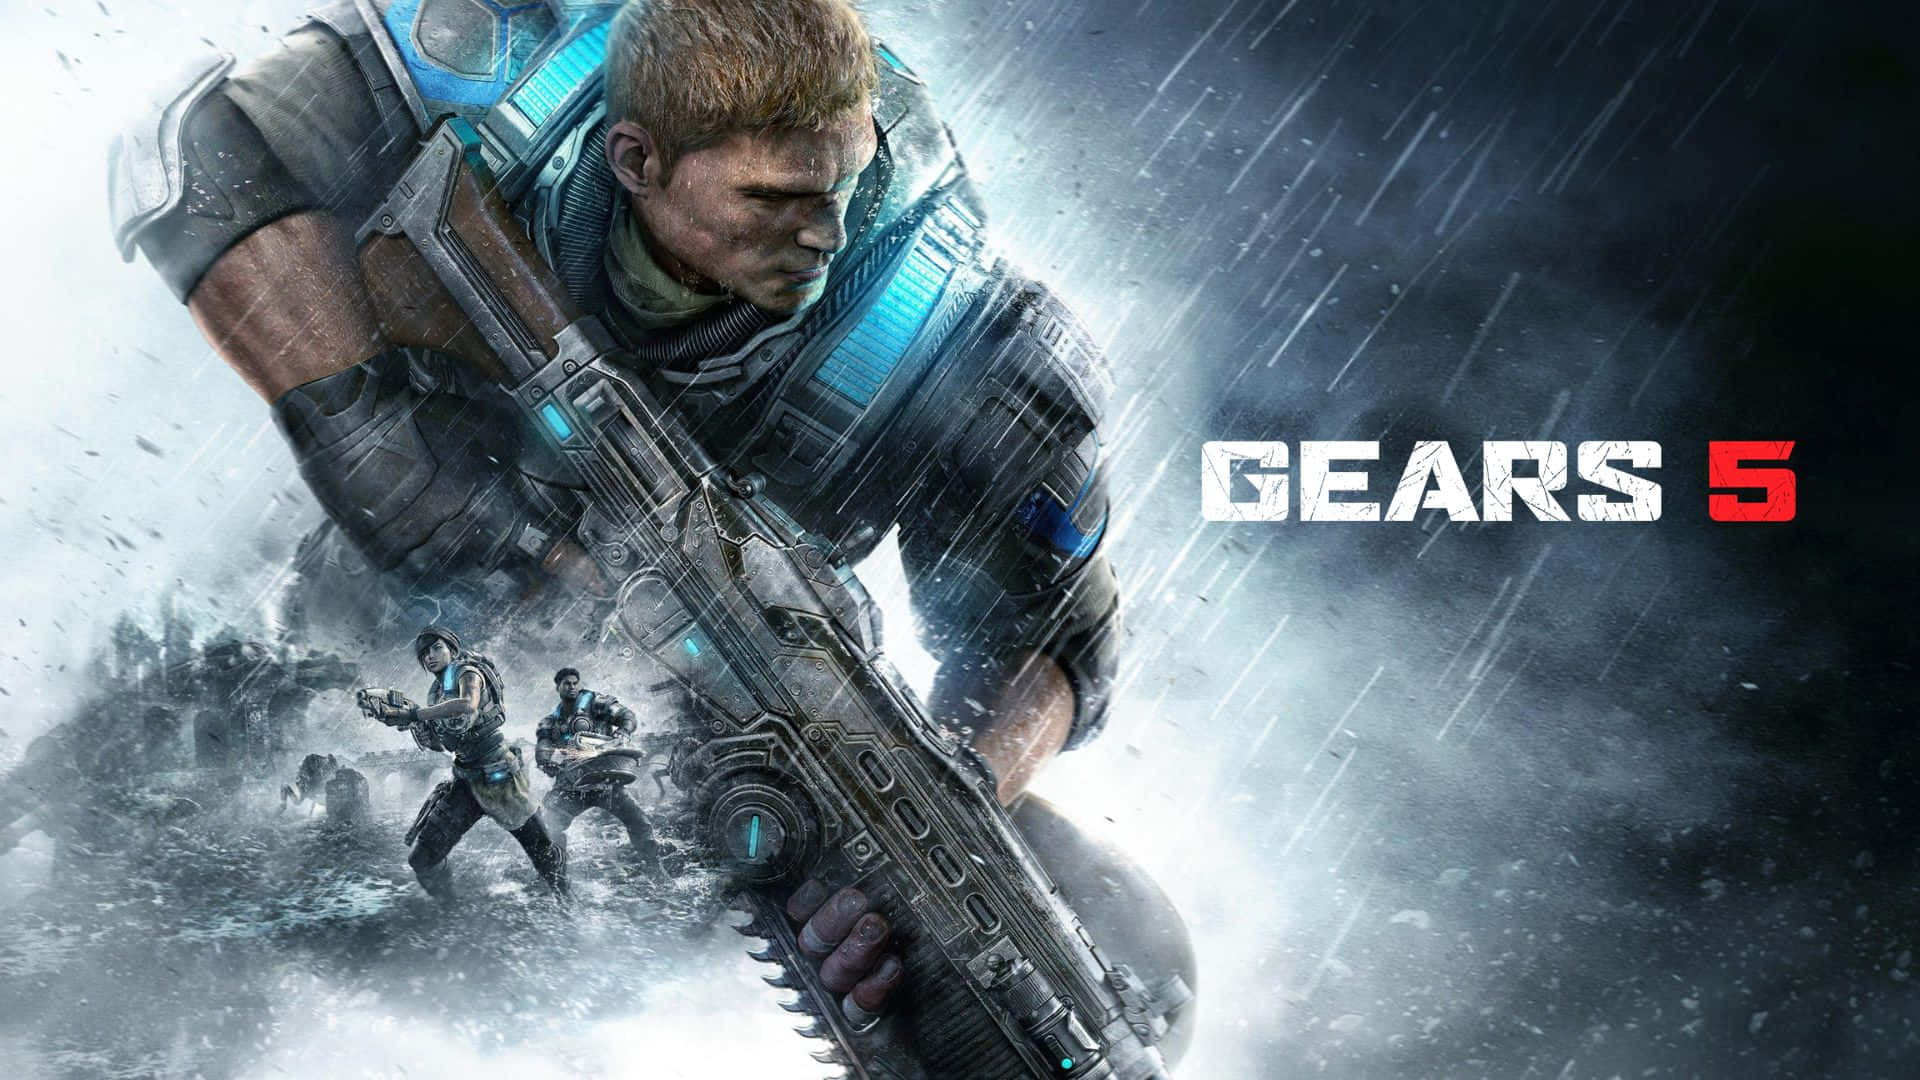 Experience the action-packed adventure of Gears of War 5 in stunning 1080p.